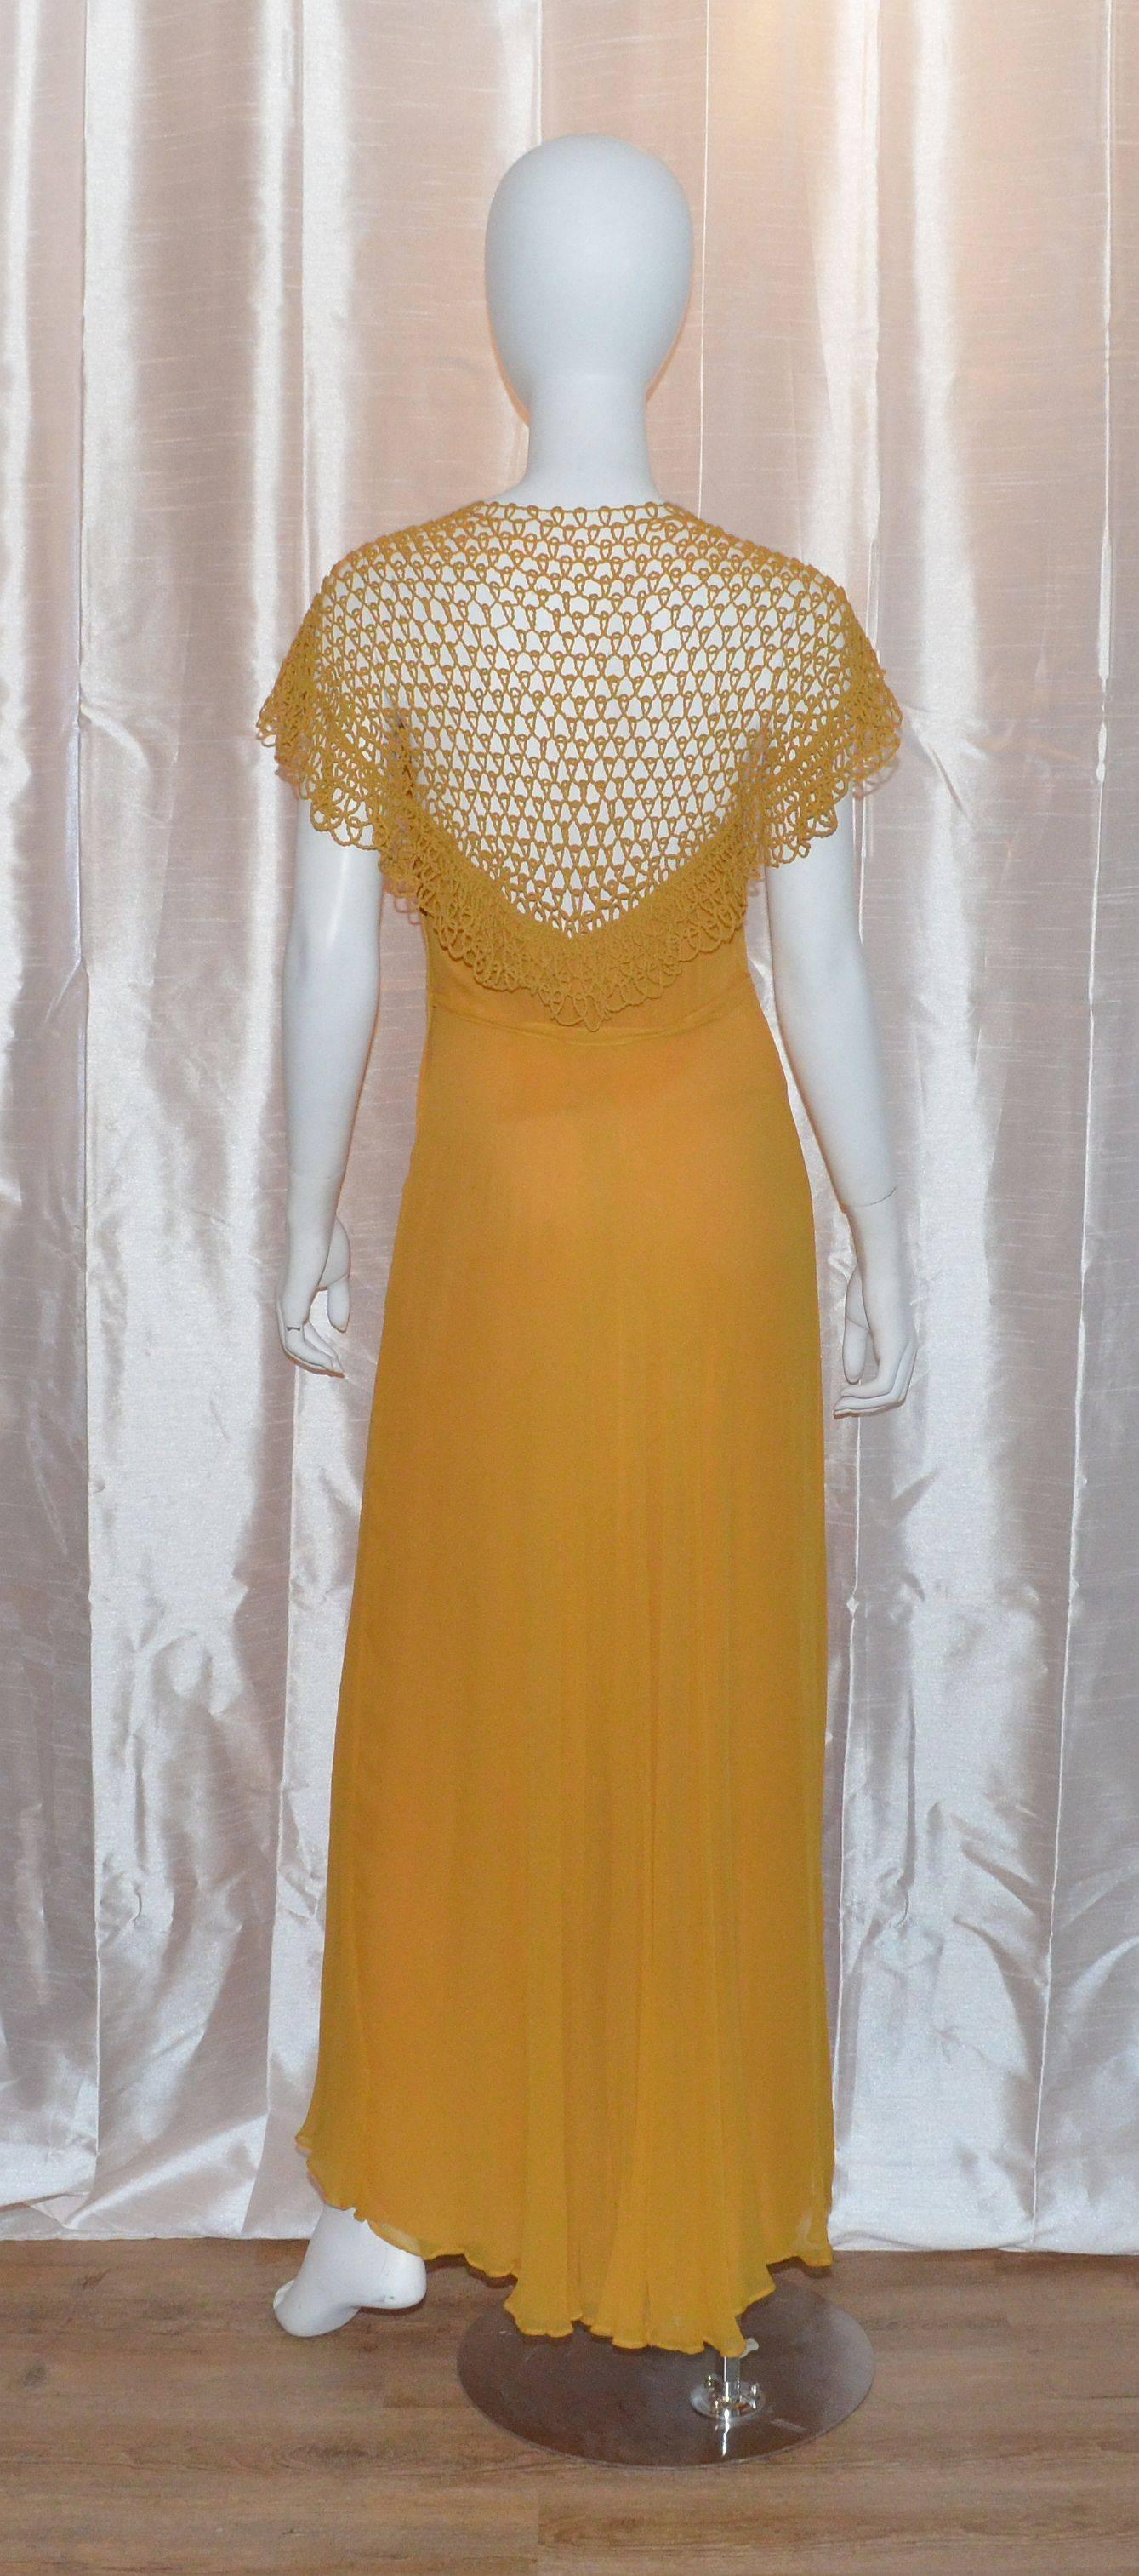 Vintage 1930's gown features a beautiful crochet neckline that continues along the back. Dress is fully lined and has a metal side zipper closure. 

Measurements:
Bust - 32''
Waist - 26''
Hips - 39''
Length - 59''